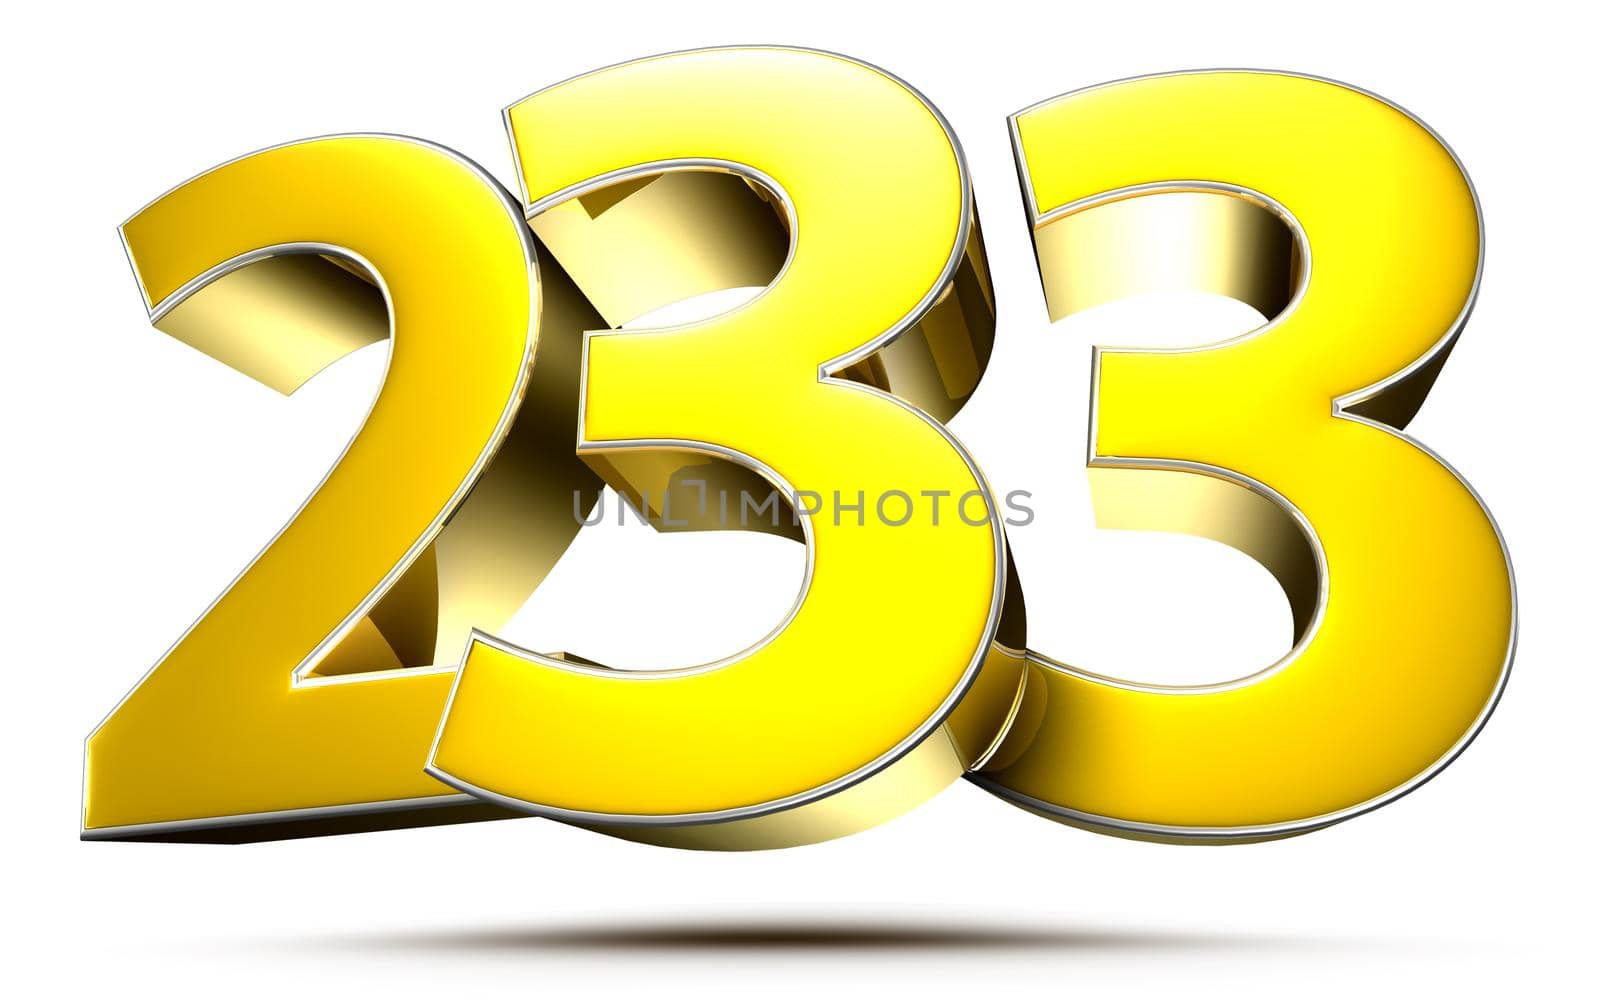 233 gold 3D illustration on white background with clipping path.